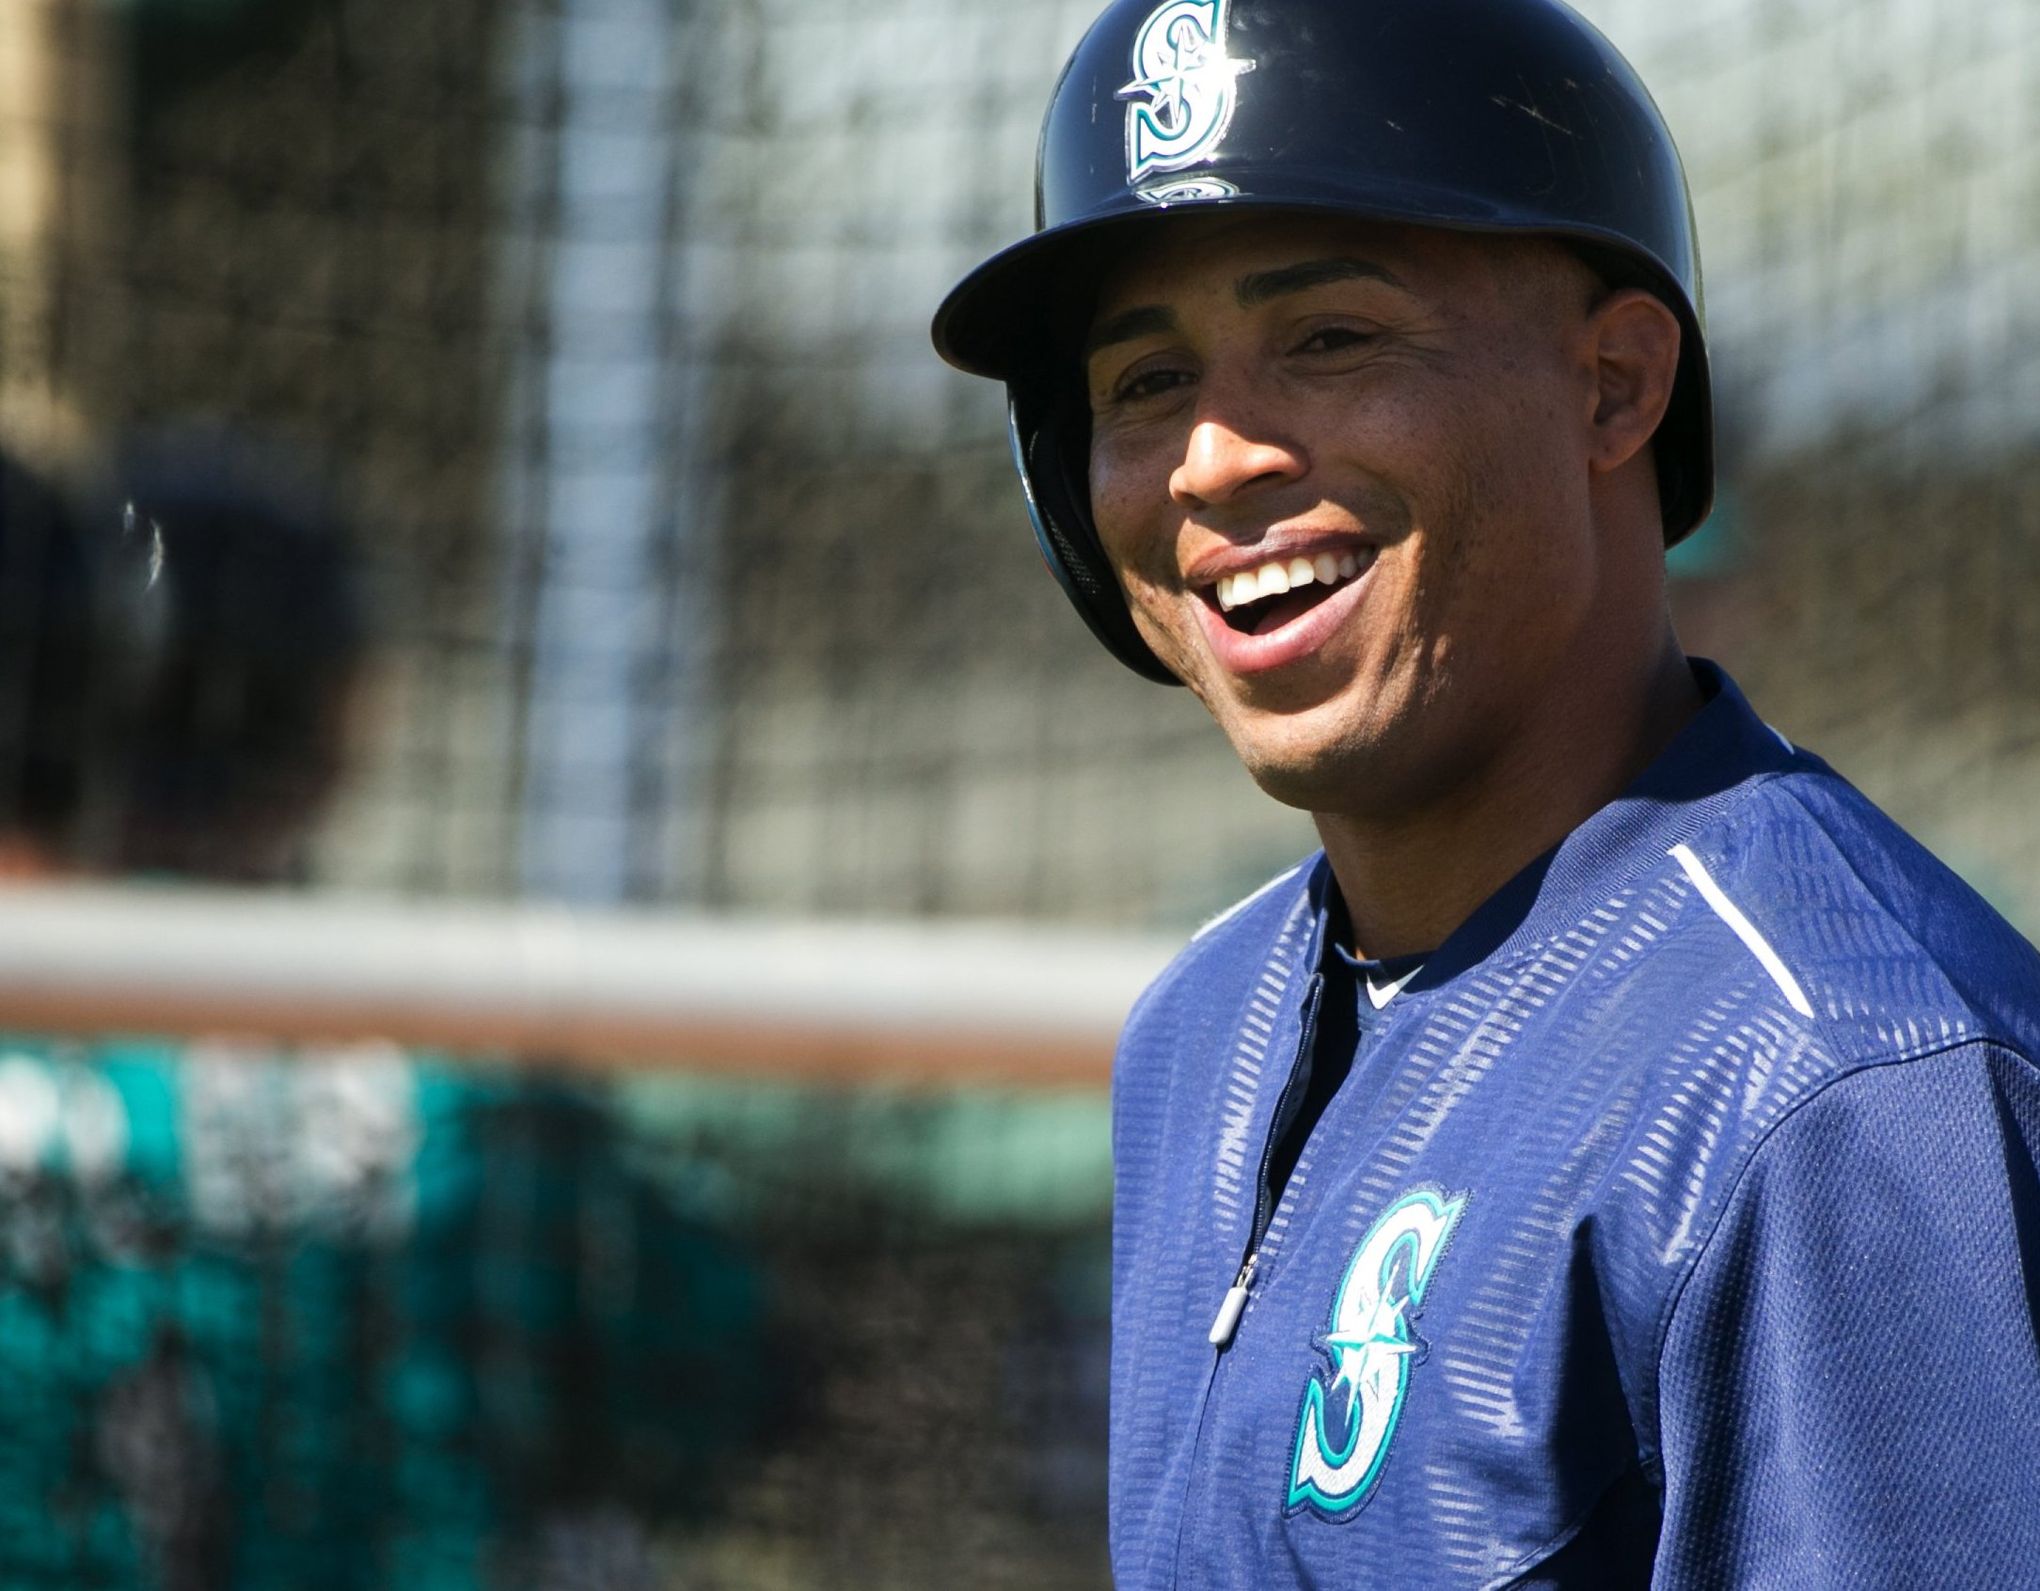 Leonys Martin's outfield arm is a sight to behold for fans